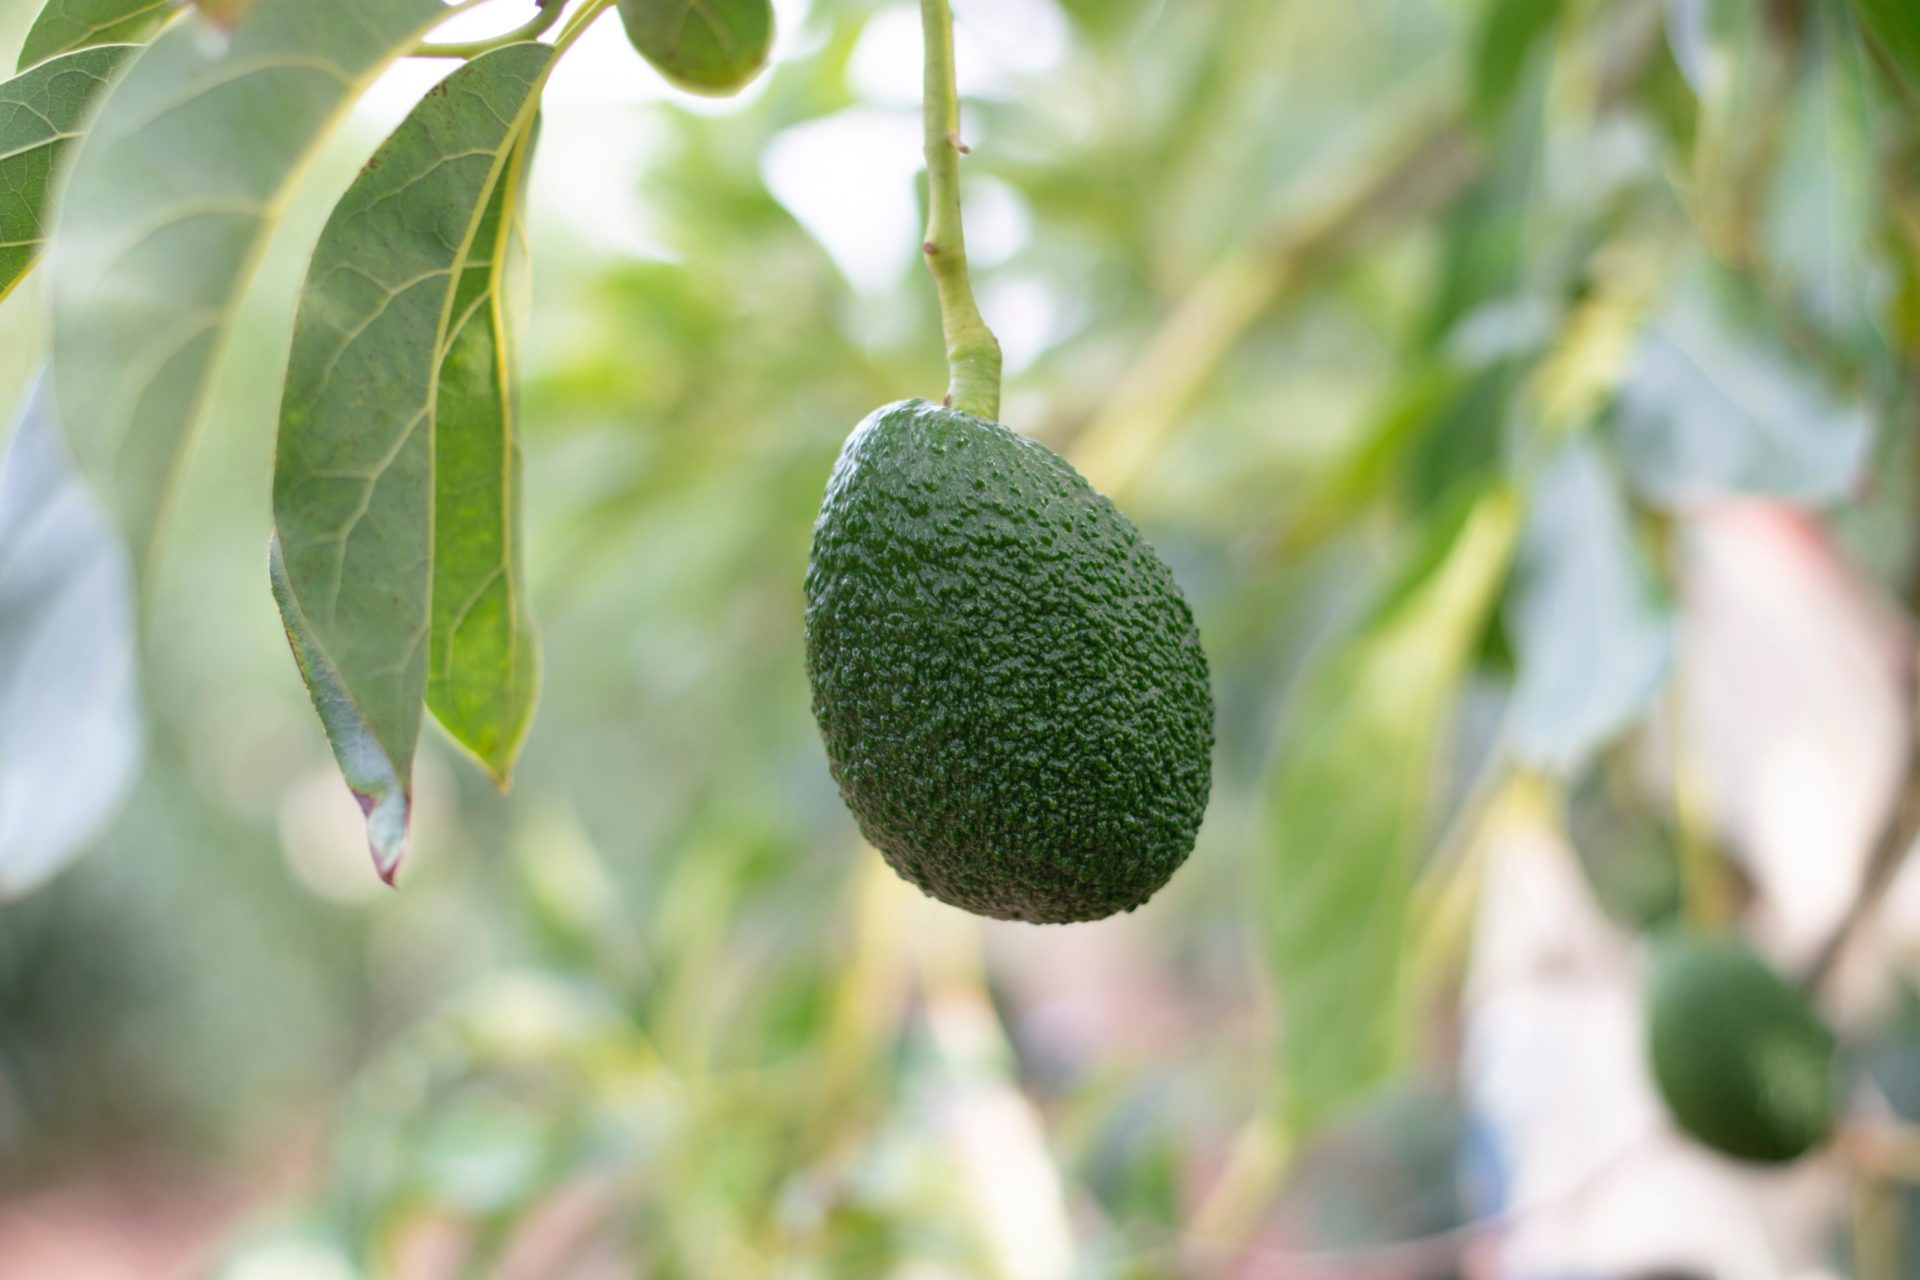 A Day at Apeel: Stress Testing Avocados